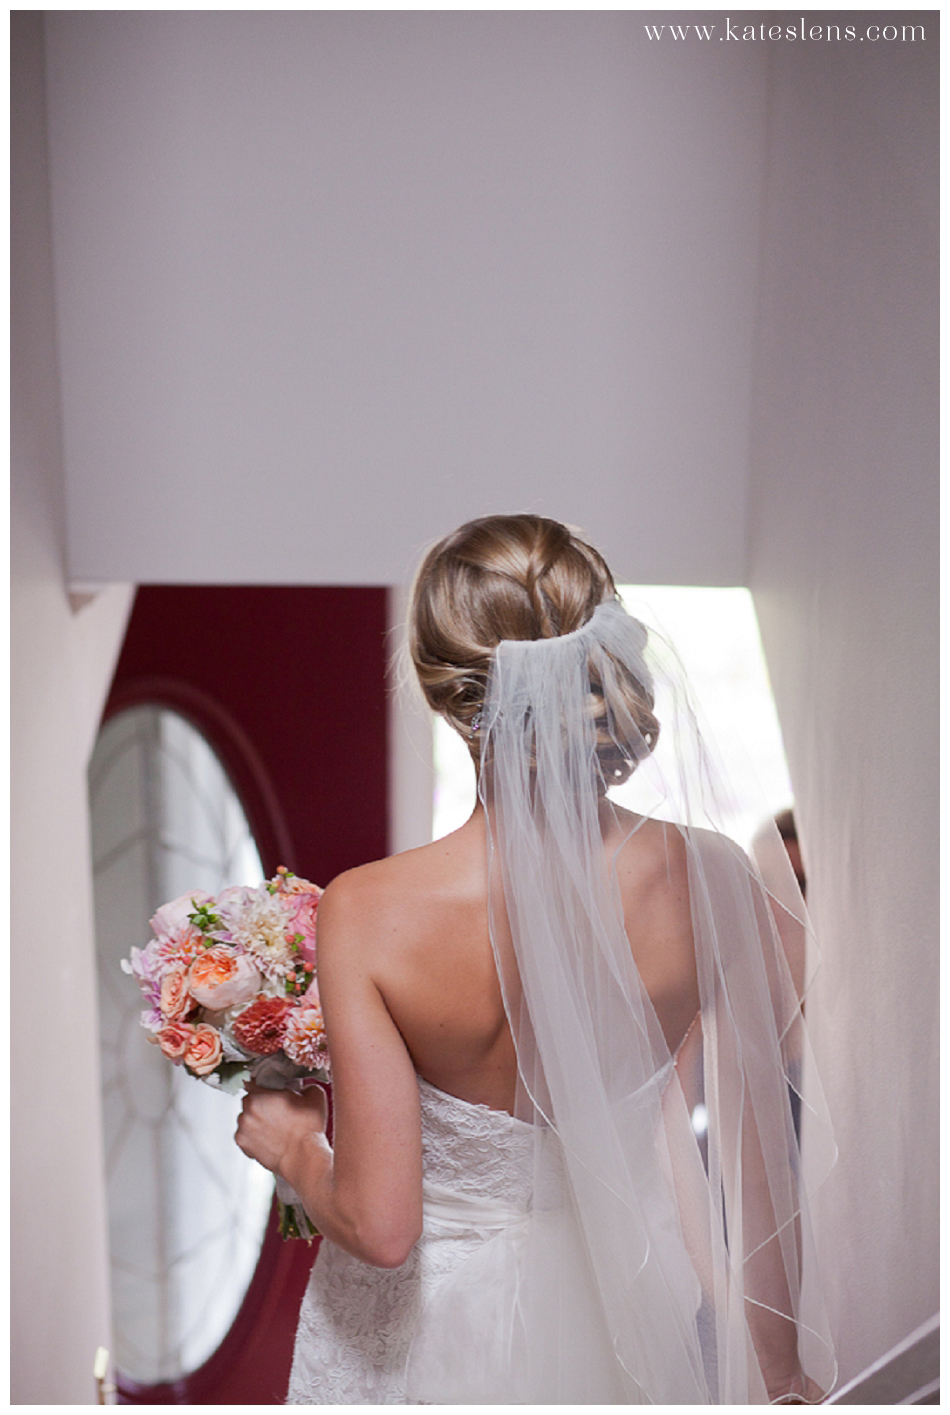 Kate's Lens Photography. Bride walking down stairs in Delaware.